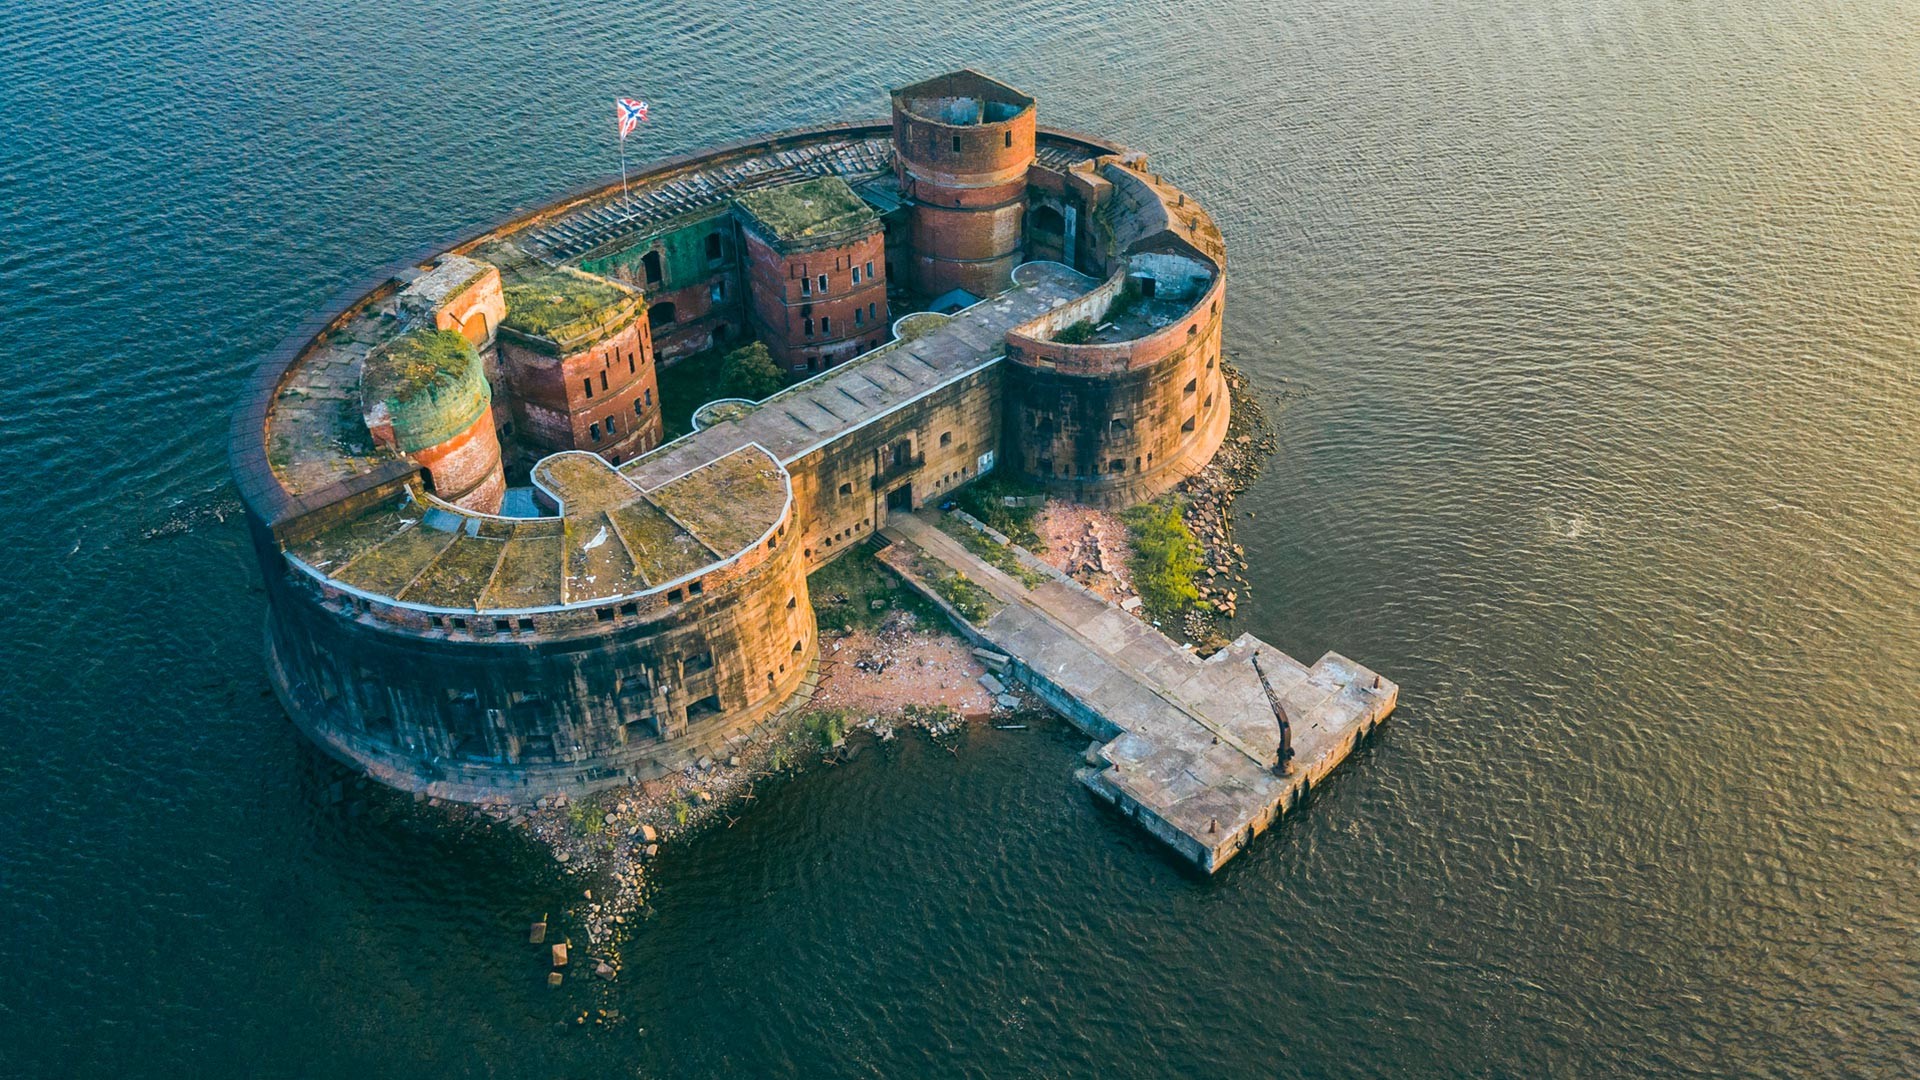 Russian history in a stone fortress - TravelFeed